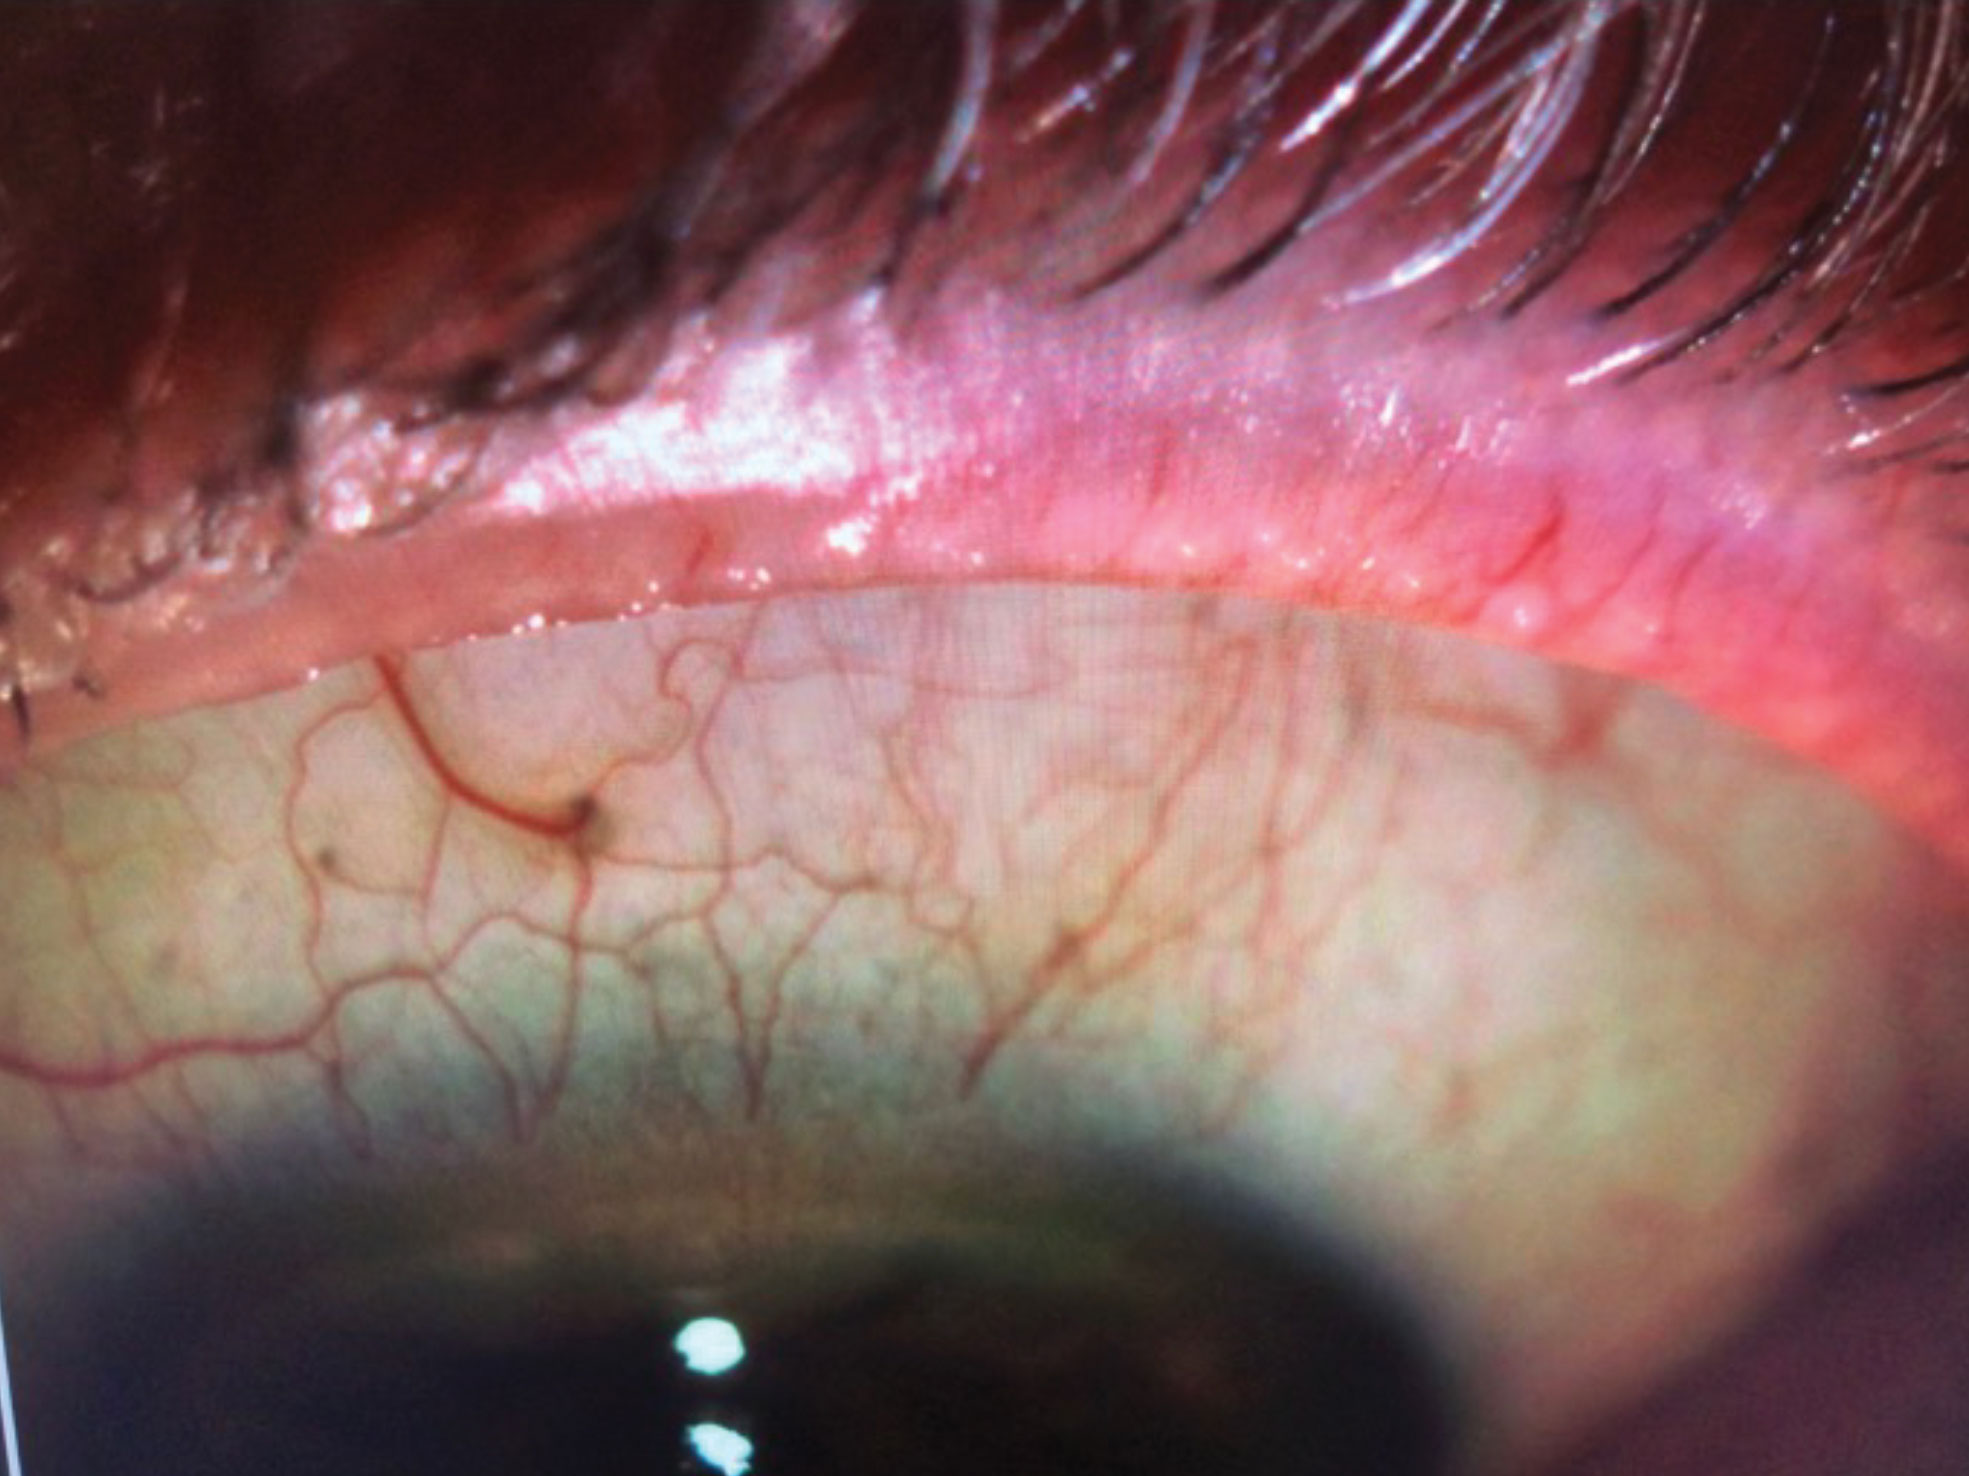 IPL can help remove telangiectasia in the eyelid margins of MGD patients.